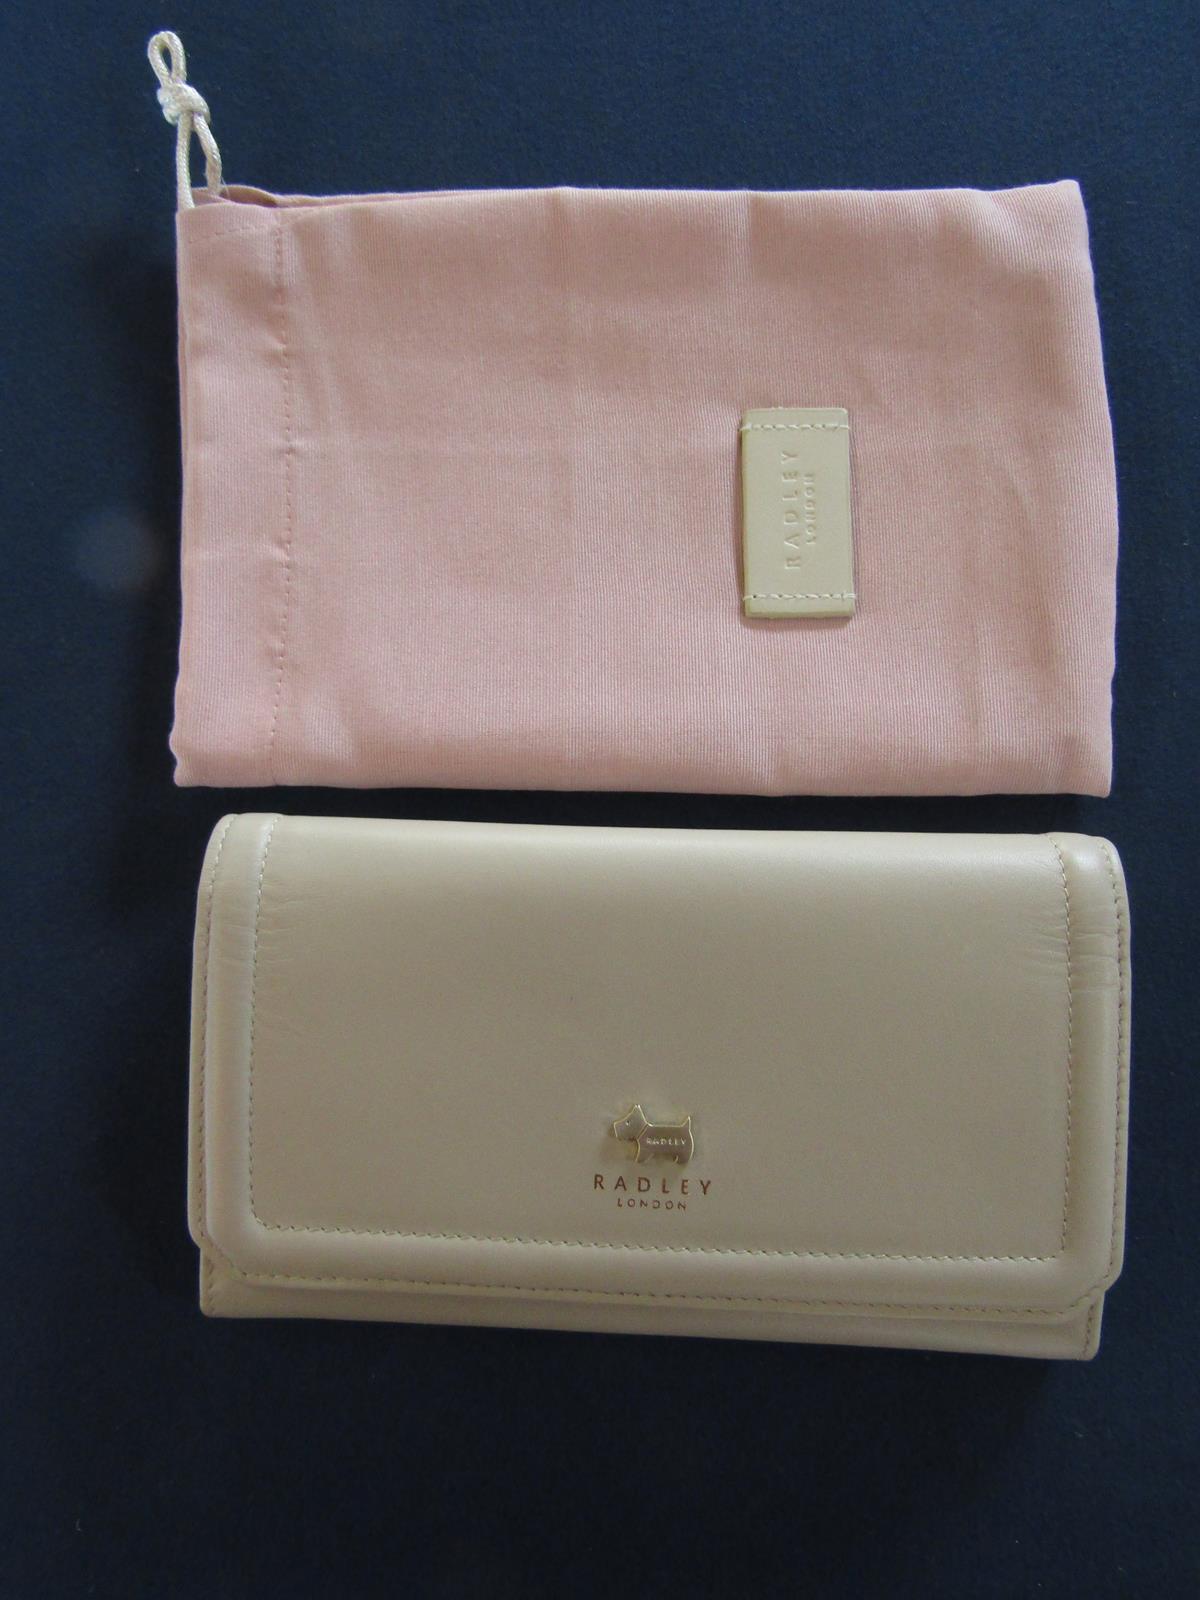 Radley purse and dust bag - Image 4 of 4